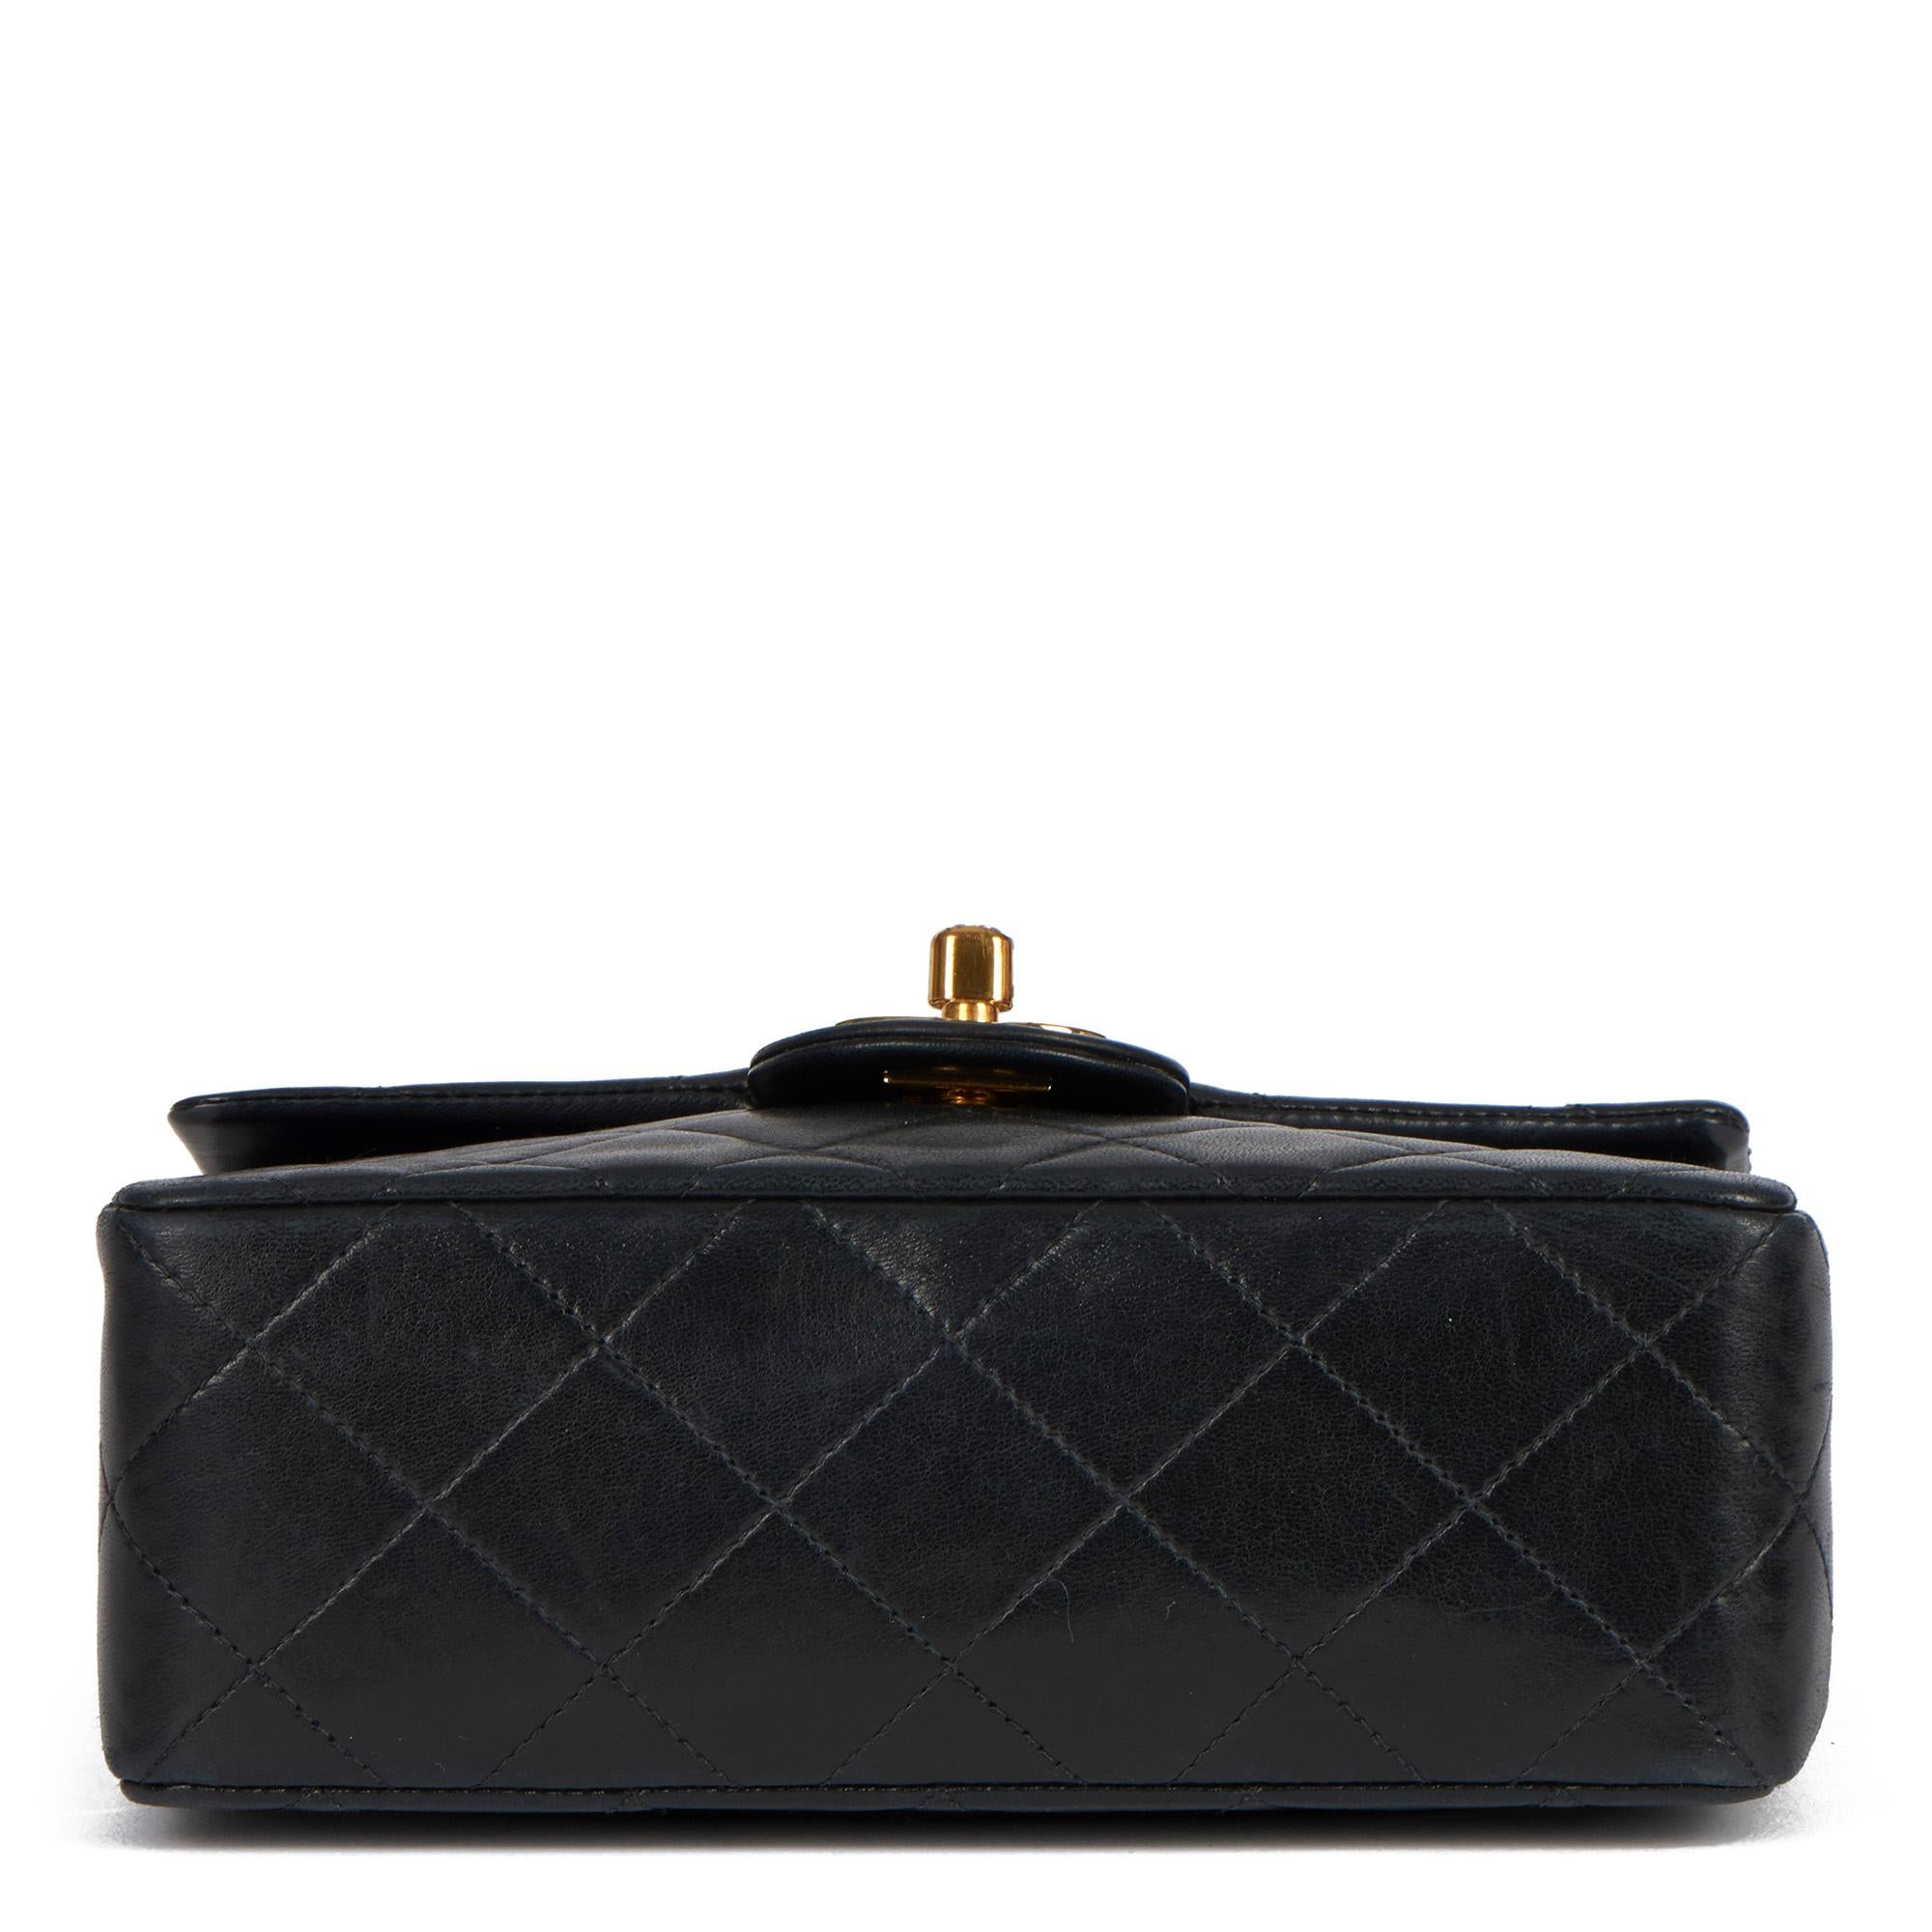 Chanel 1997 Black Quilted Lambskin Leather Vintage Mini Flap Bag  8